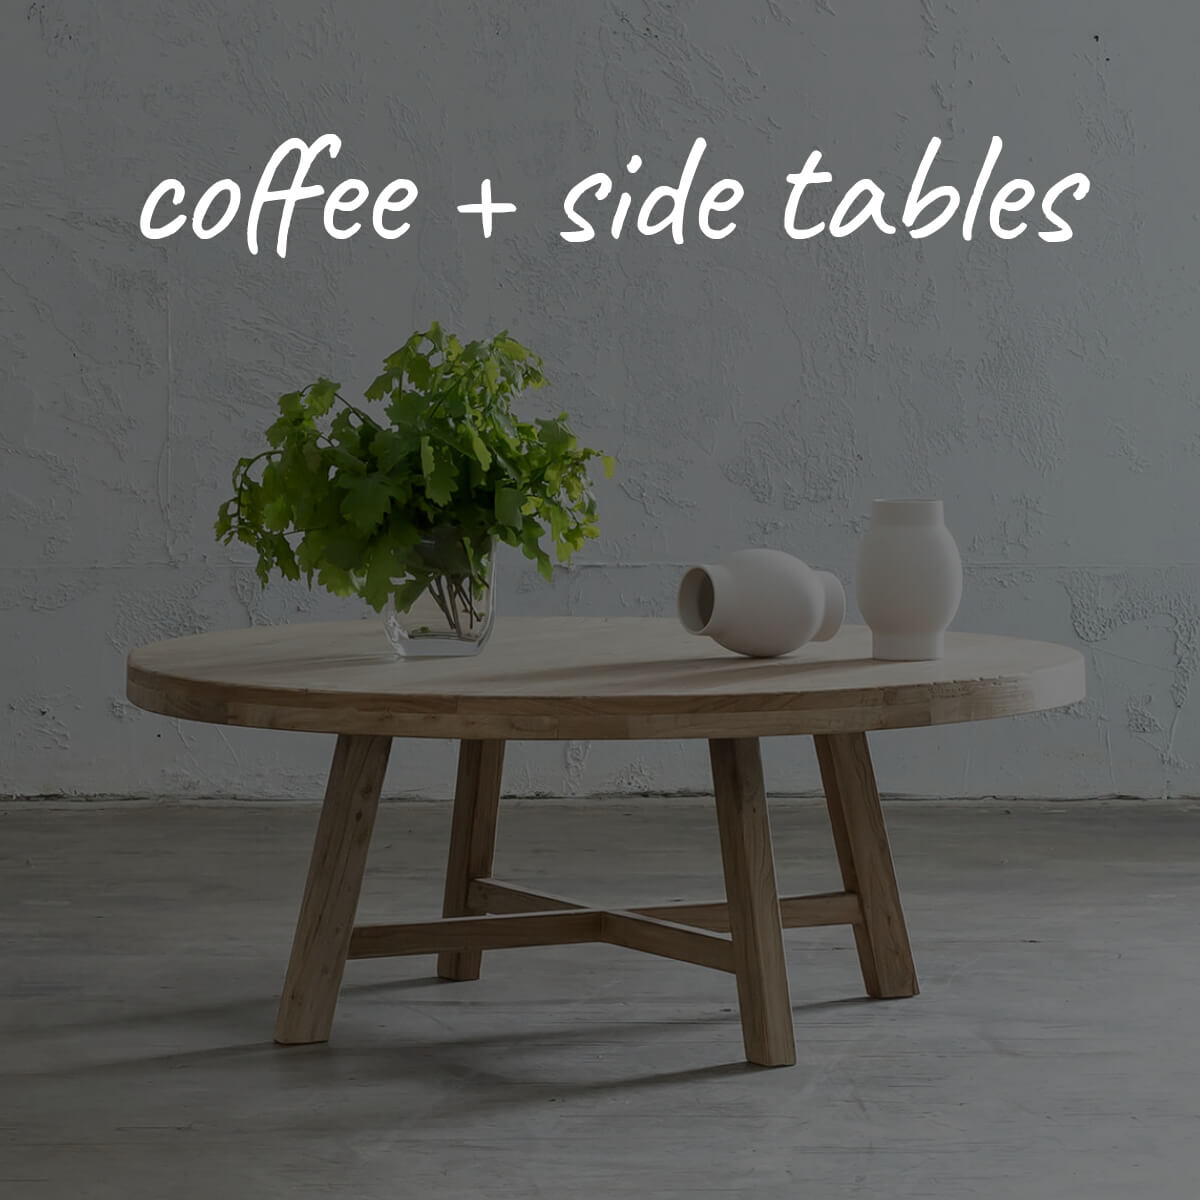 COFFEE + SIDE + HALL TABLES